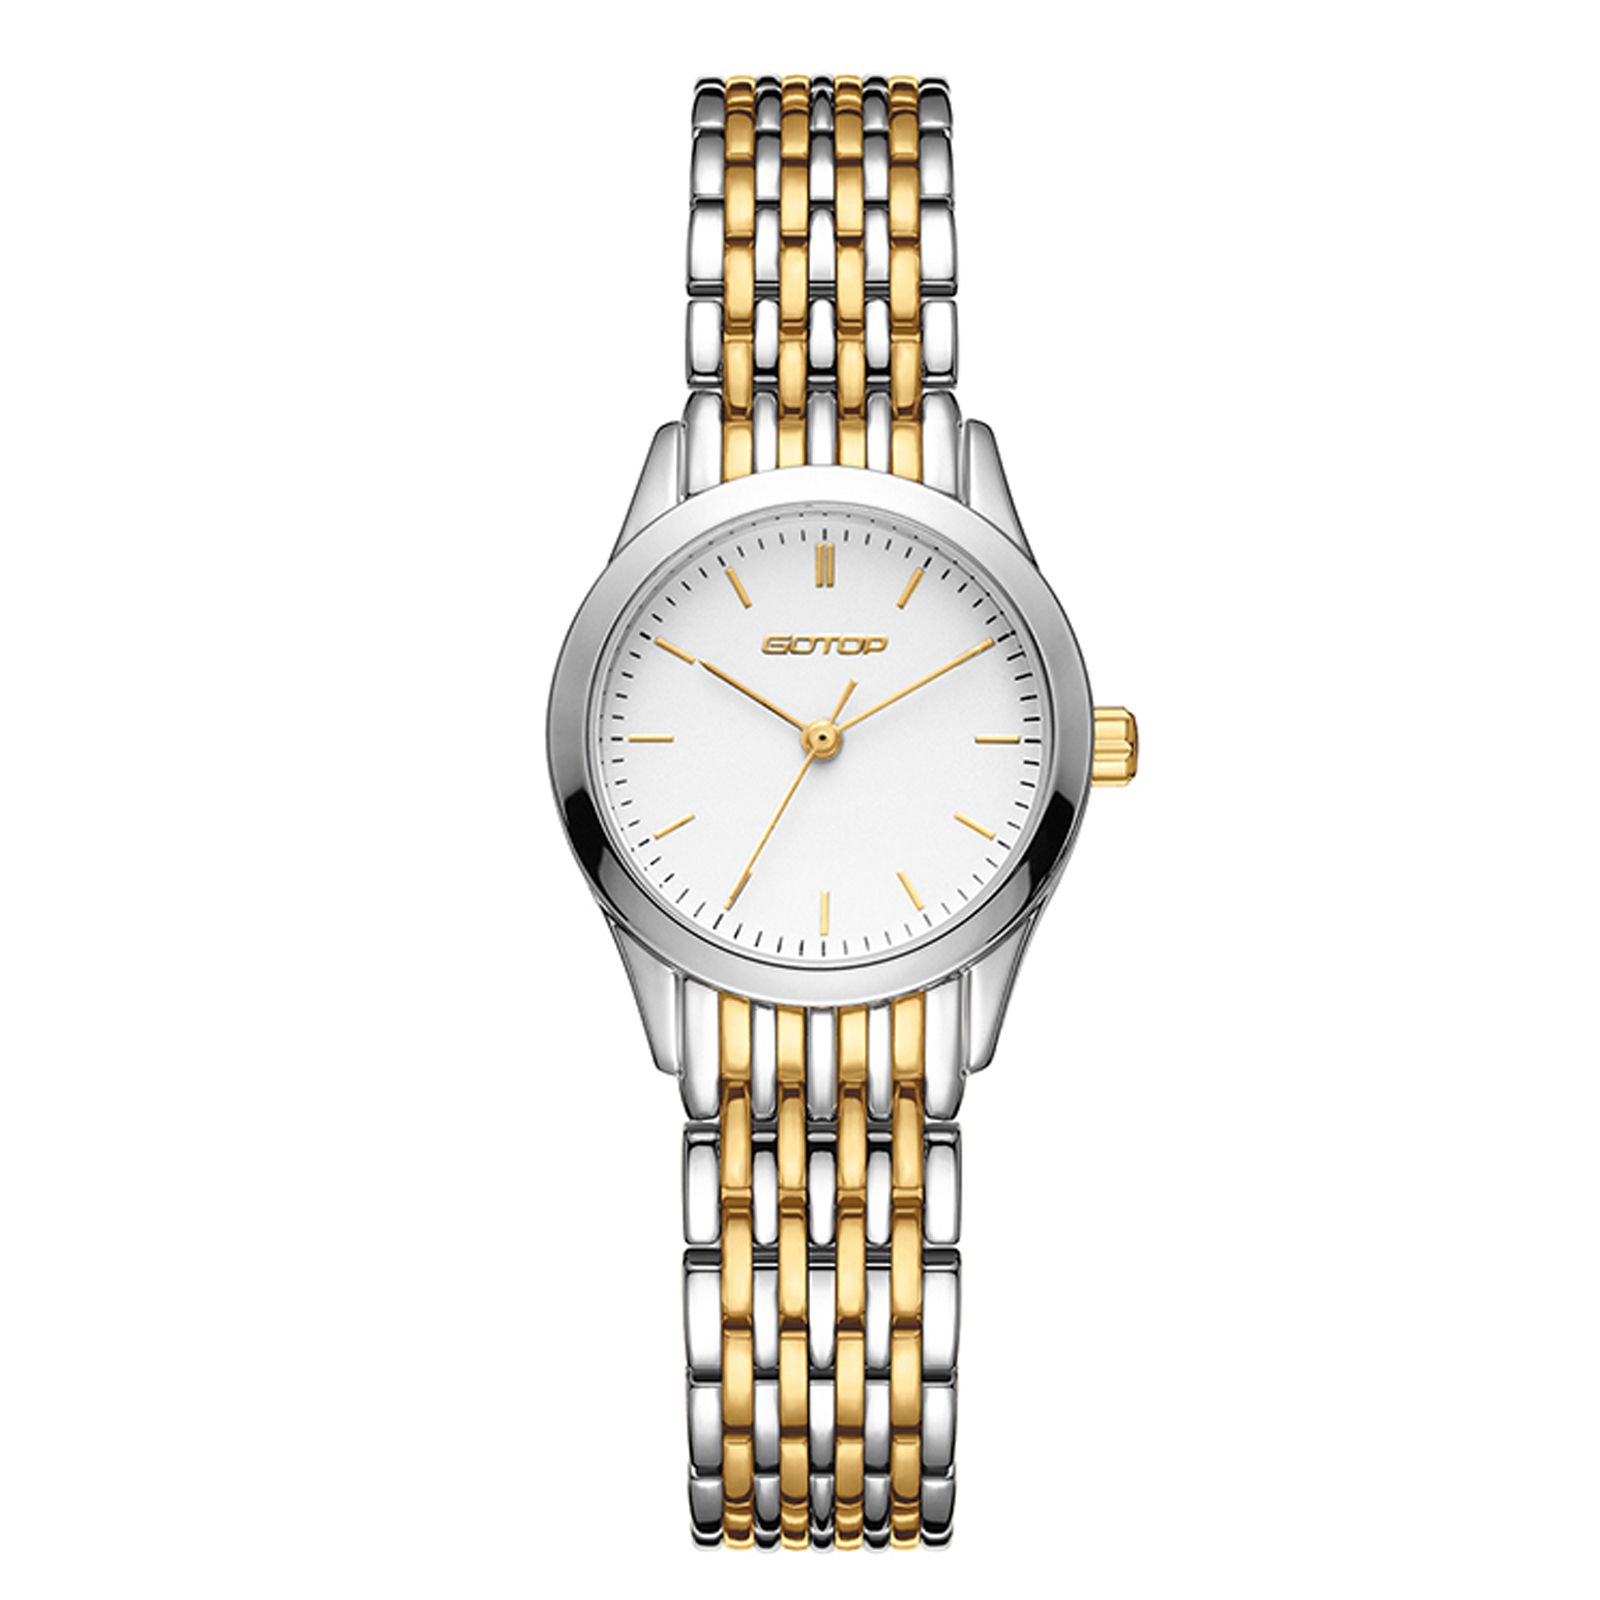 Two Tone Gold And Silver Stainless Steel Women's Watch